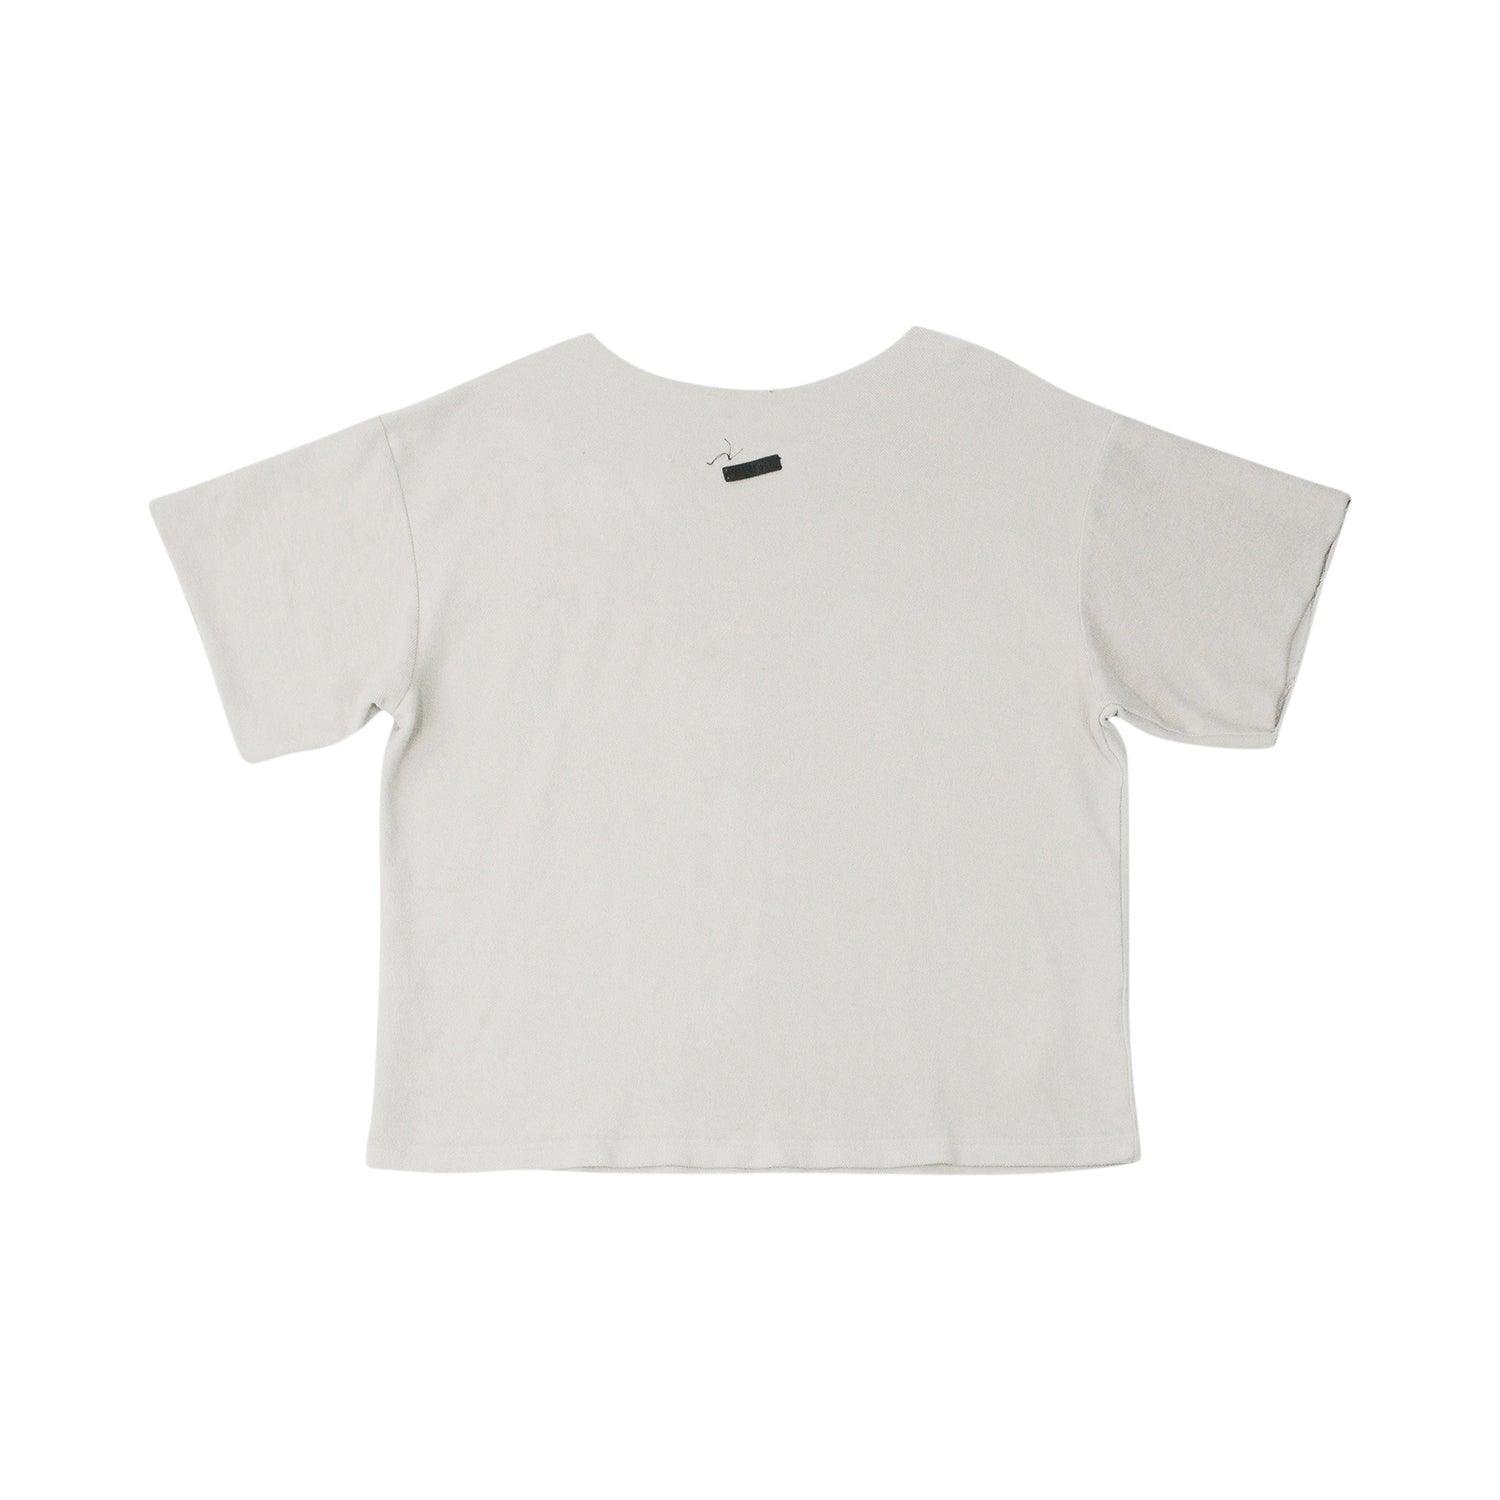 Fear Of God Shirt - Men's XL - Fashionably Yours